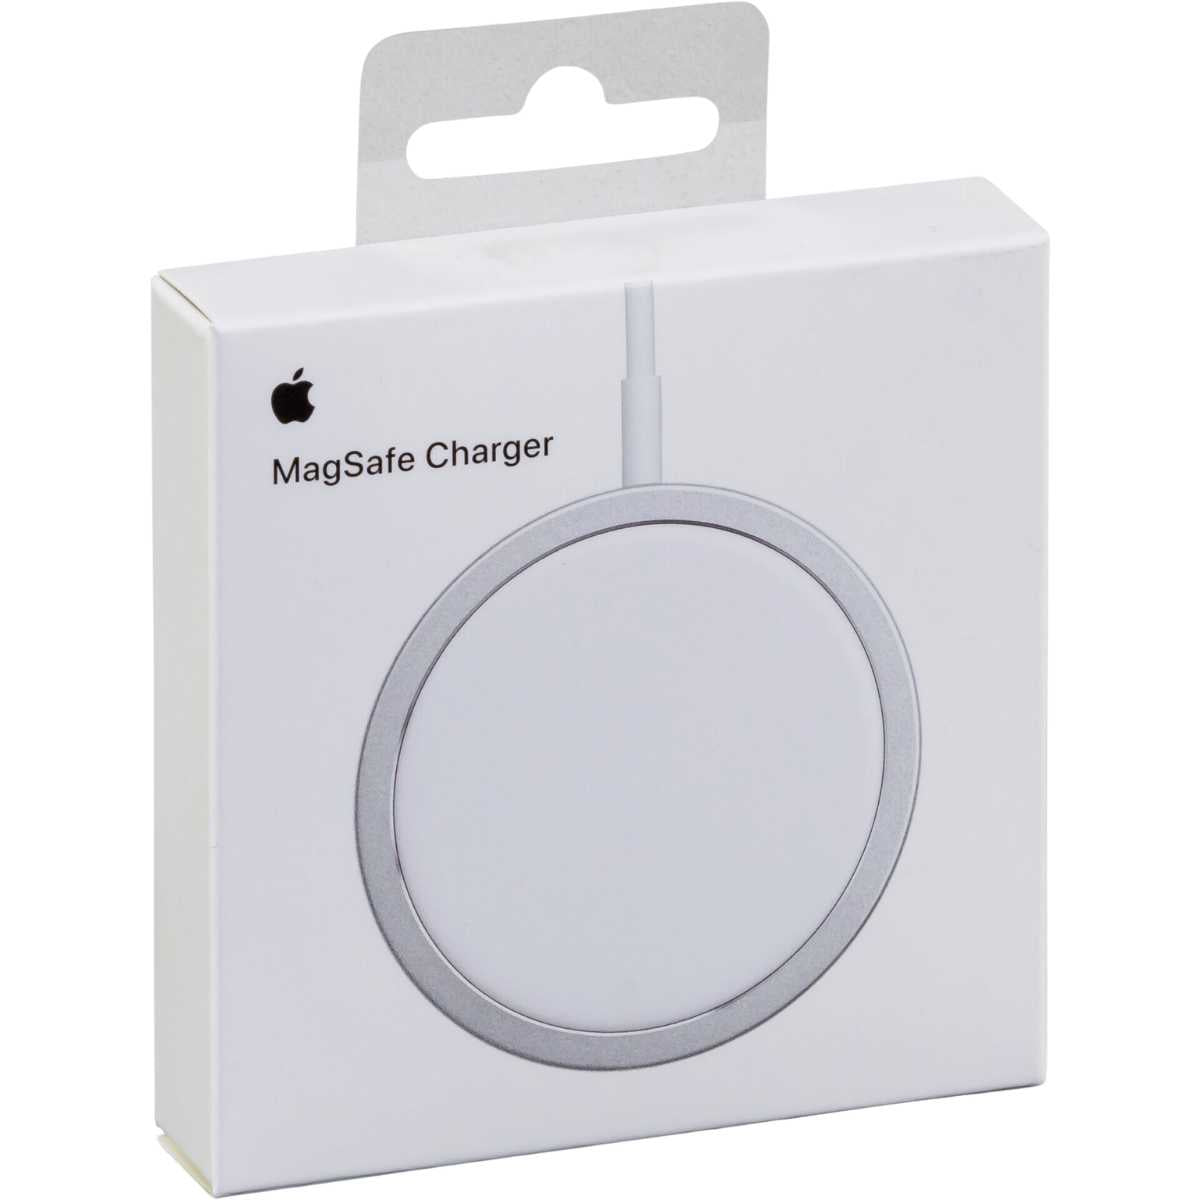 Skip Qi2 and just grab an official Apple MagSafe Charger while